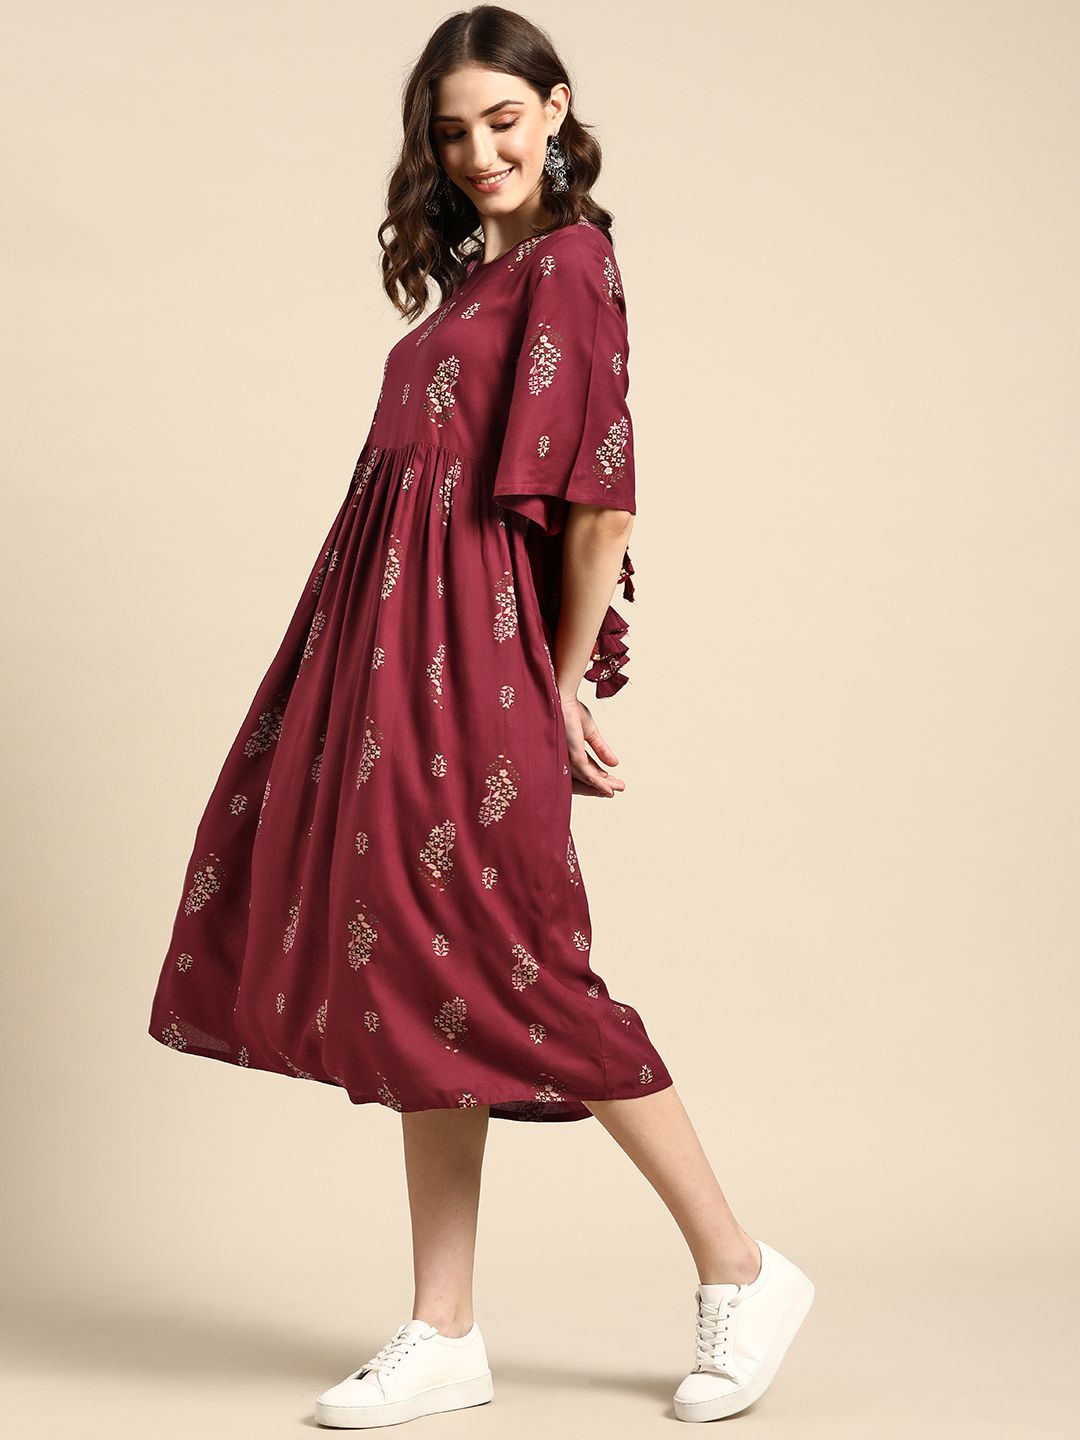 Sangria Maroon & Grey Floral Ethnic A-Line Midi Dress Price in India